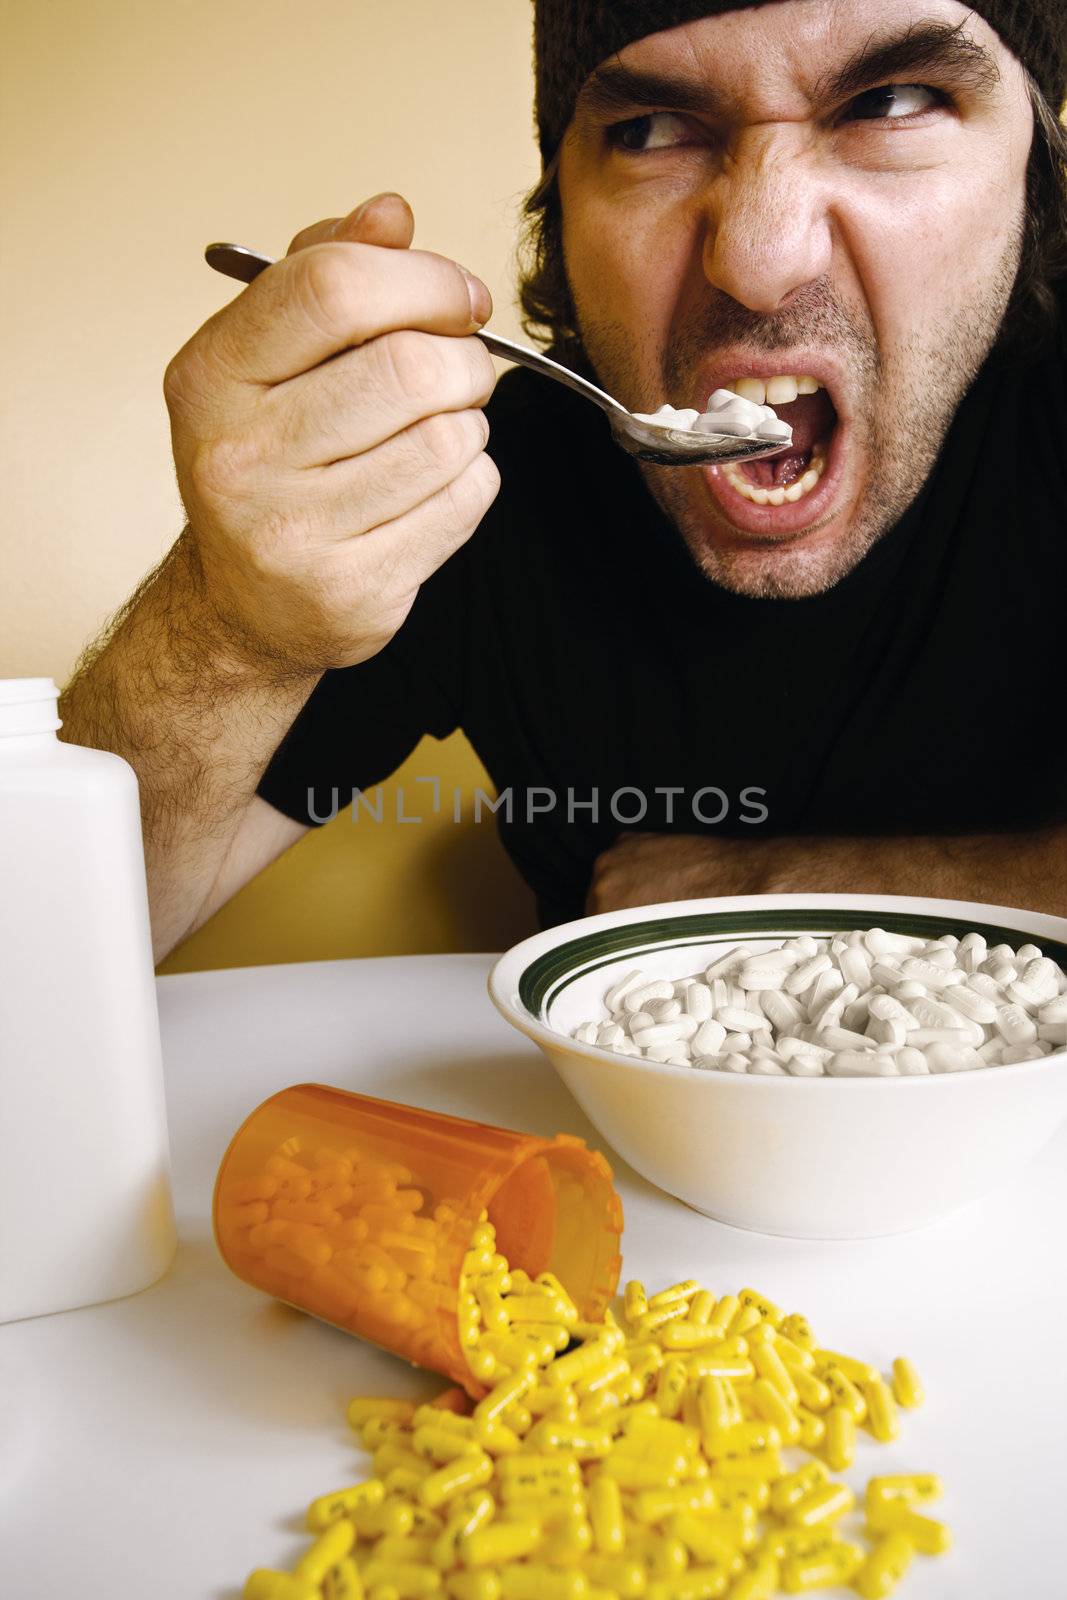 A man feeding himself medication with a spoon. Metaphor for addiction, dependency, etc.
